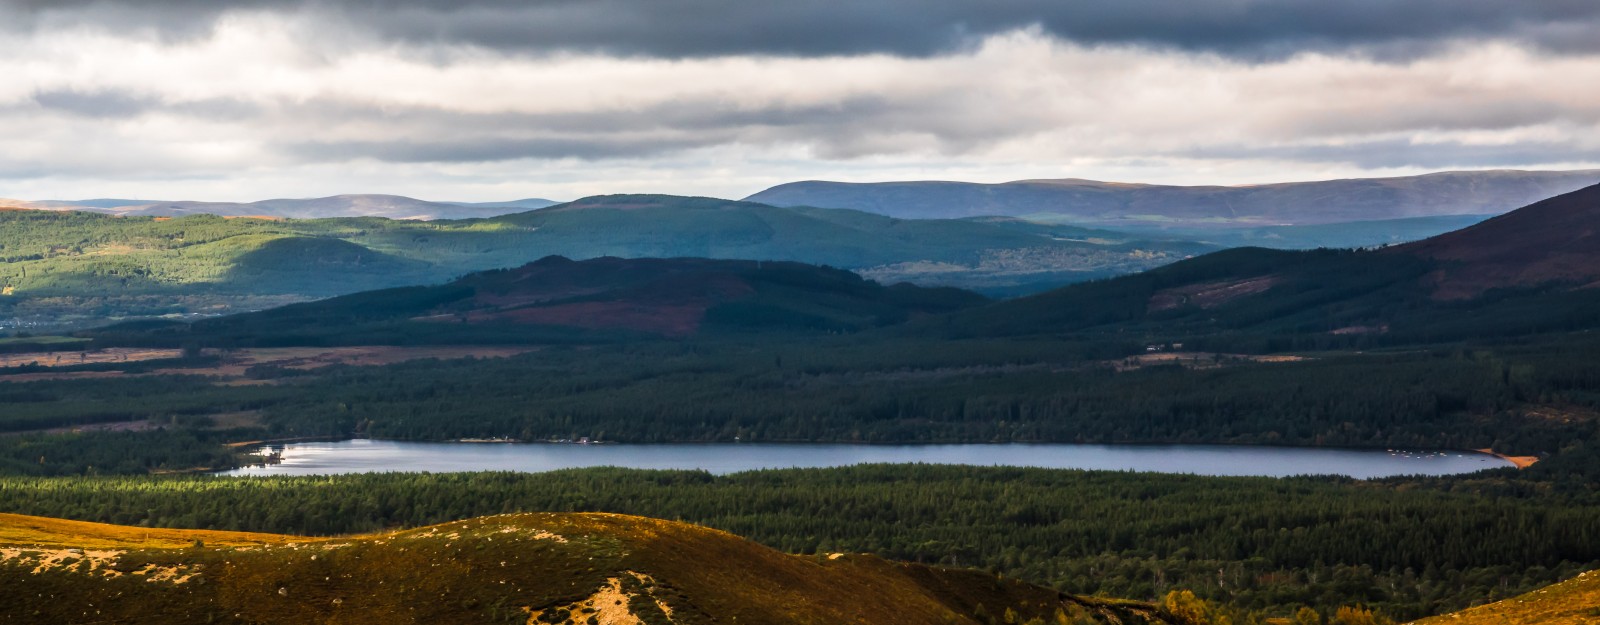 Glimpse of Loch Morlich from above